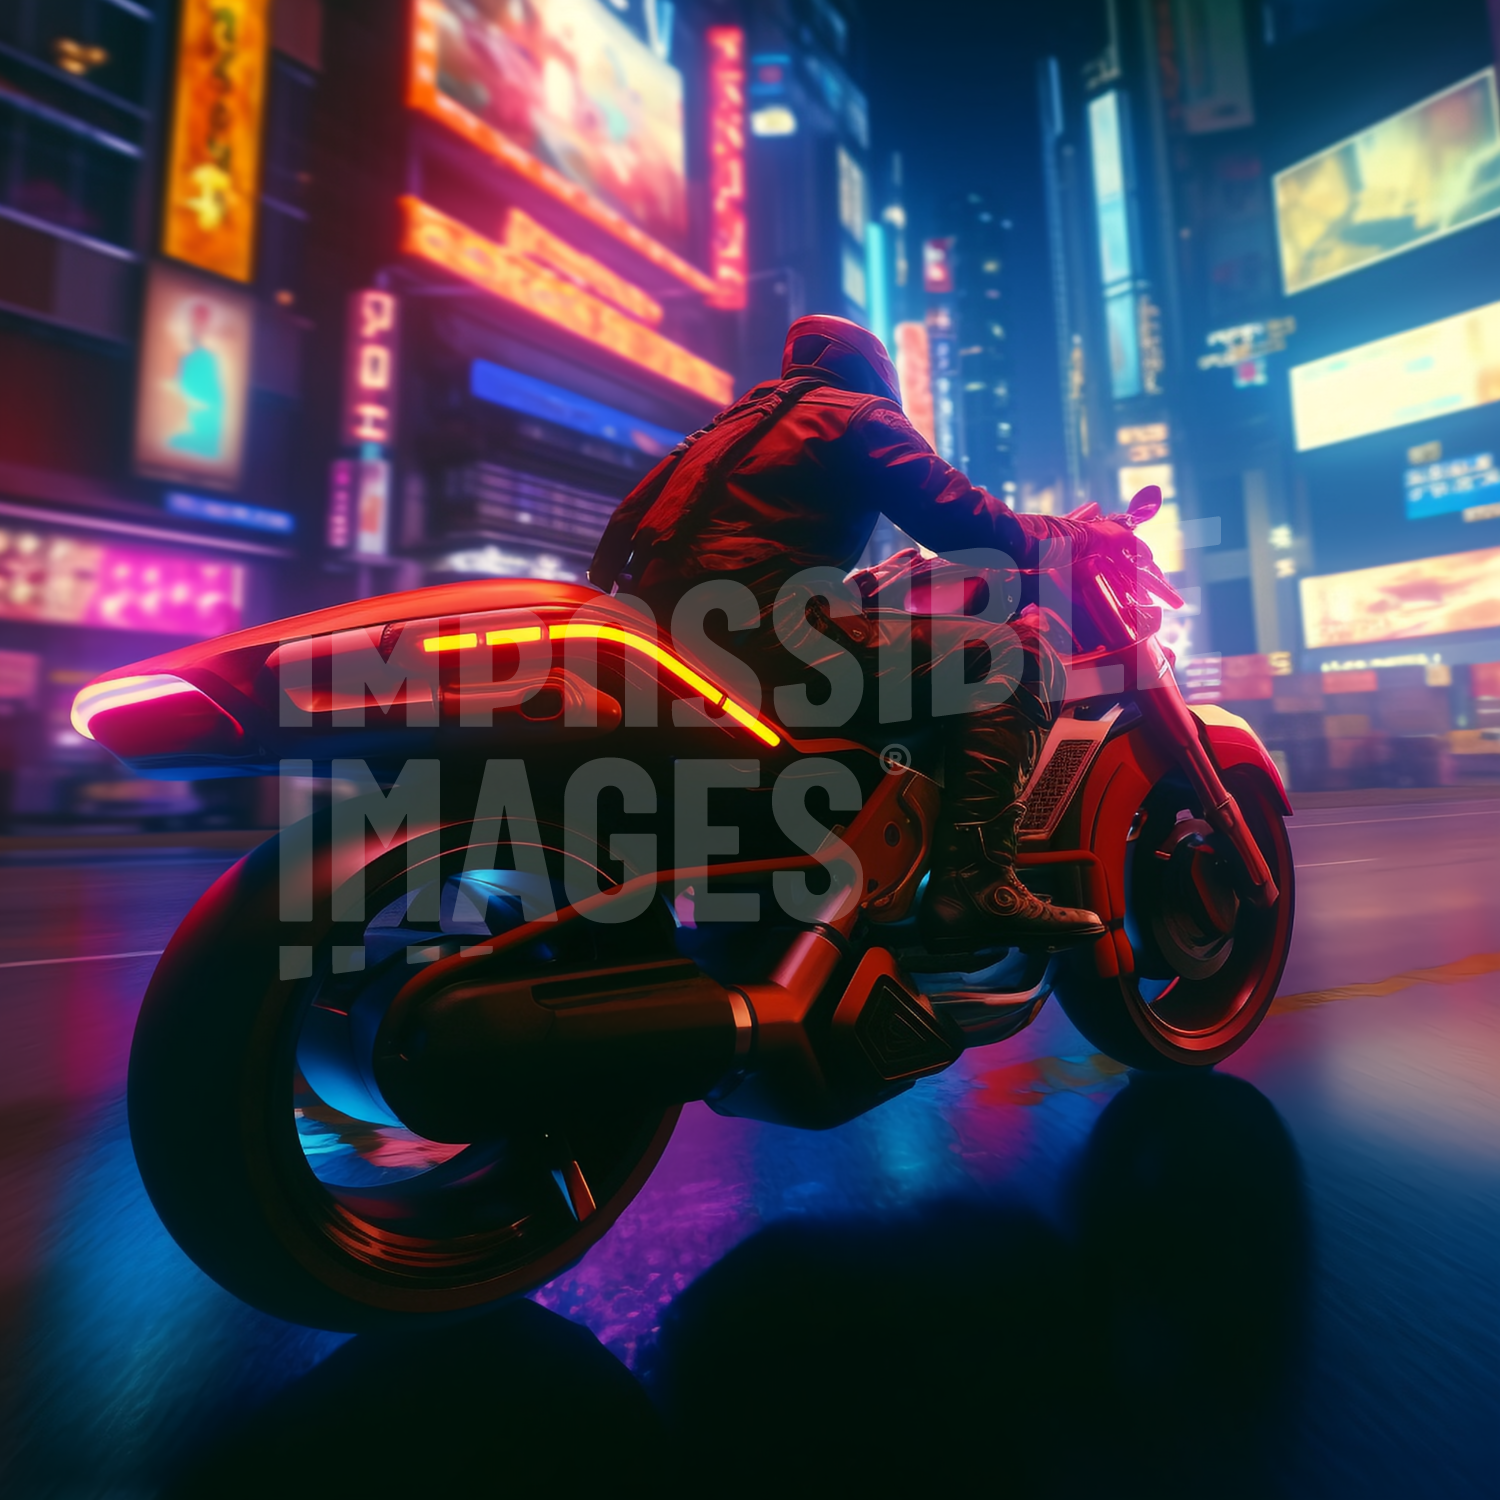 A person riding a motorcycle on a city street - 